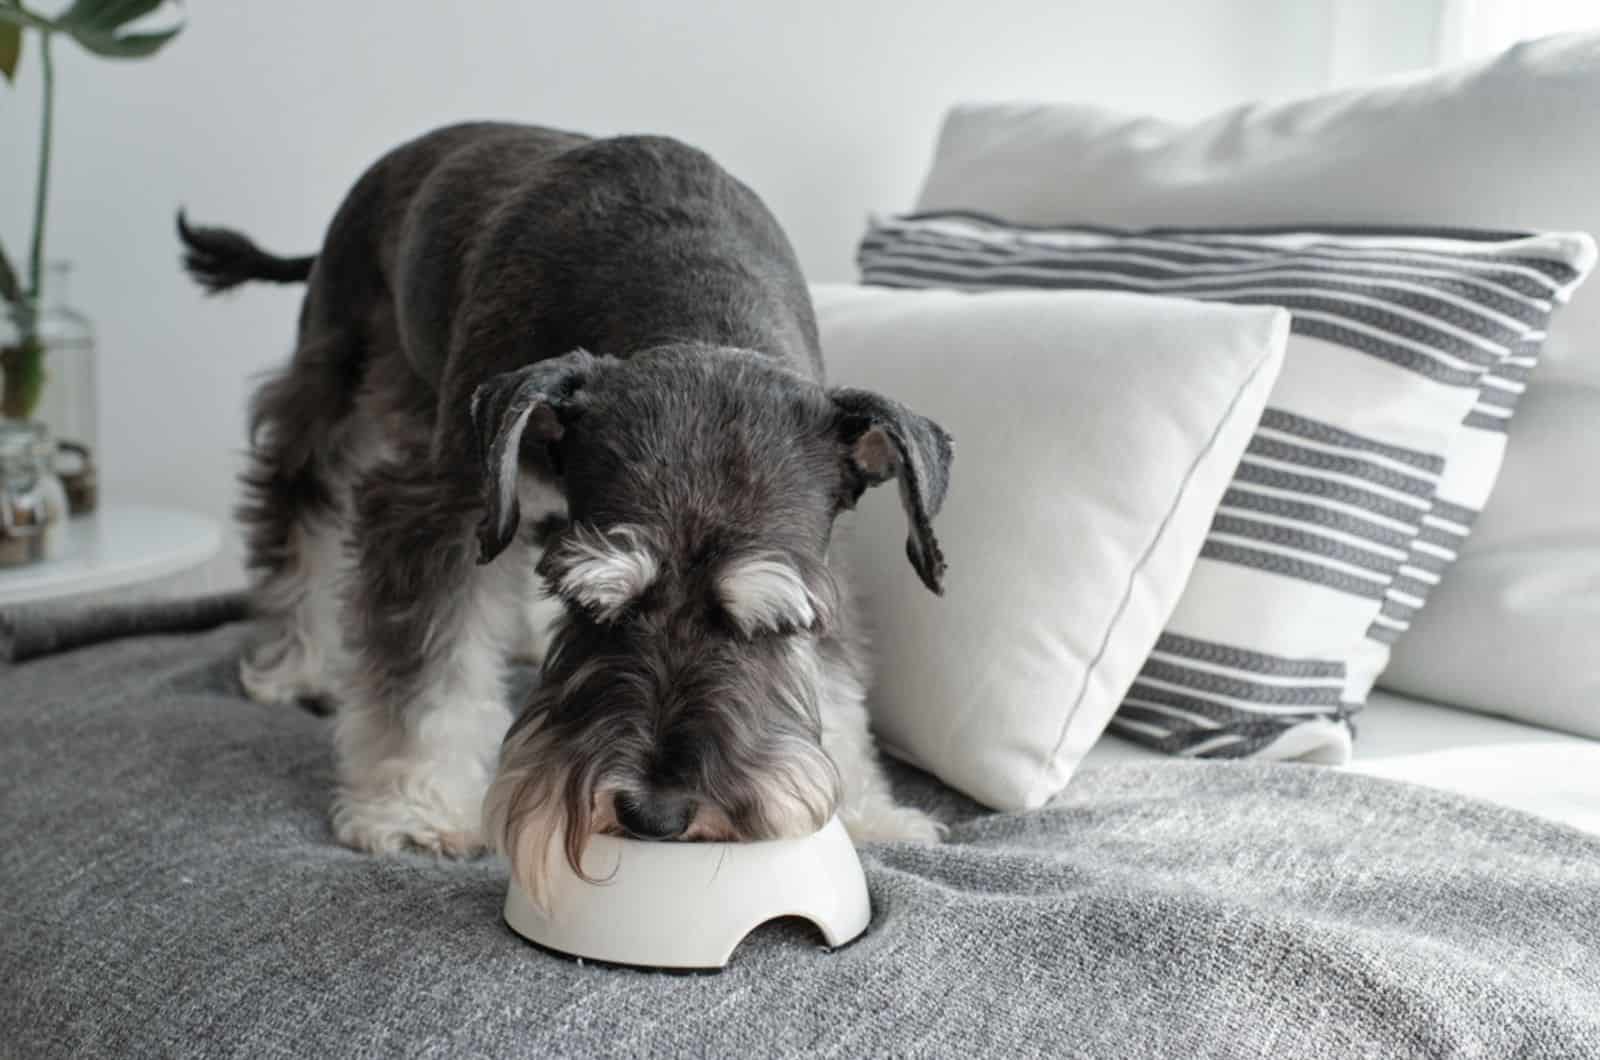 miniature schnauzer standing on sofa and eating from a bowl